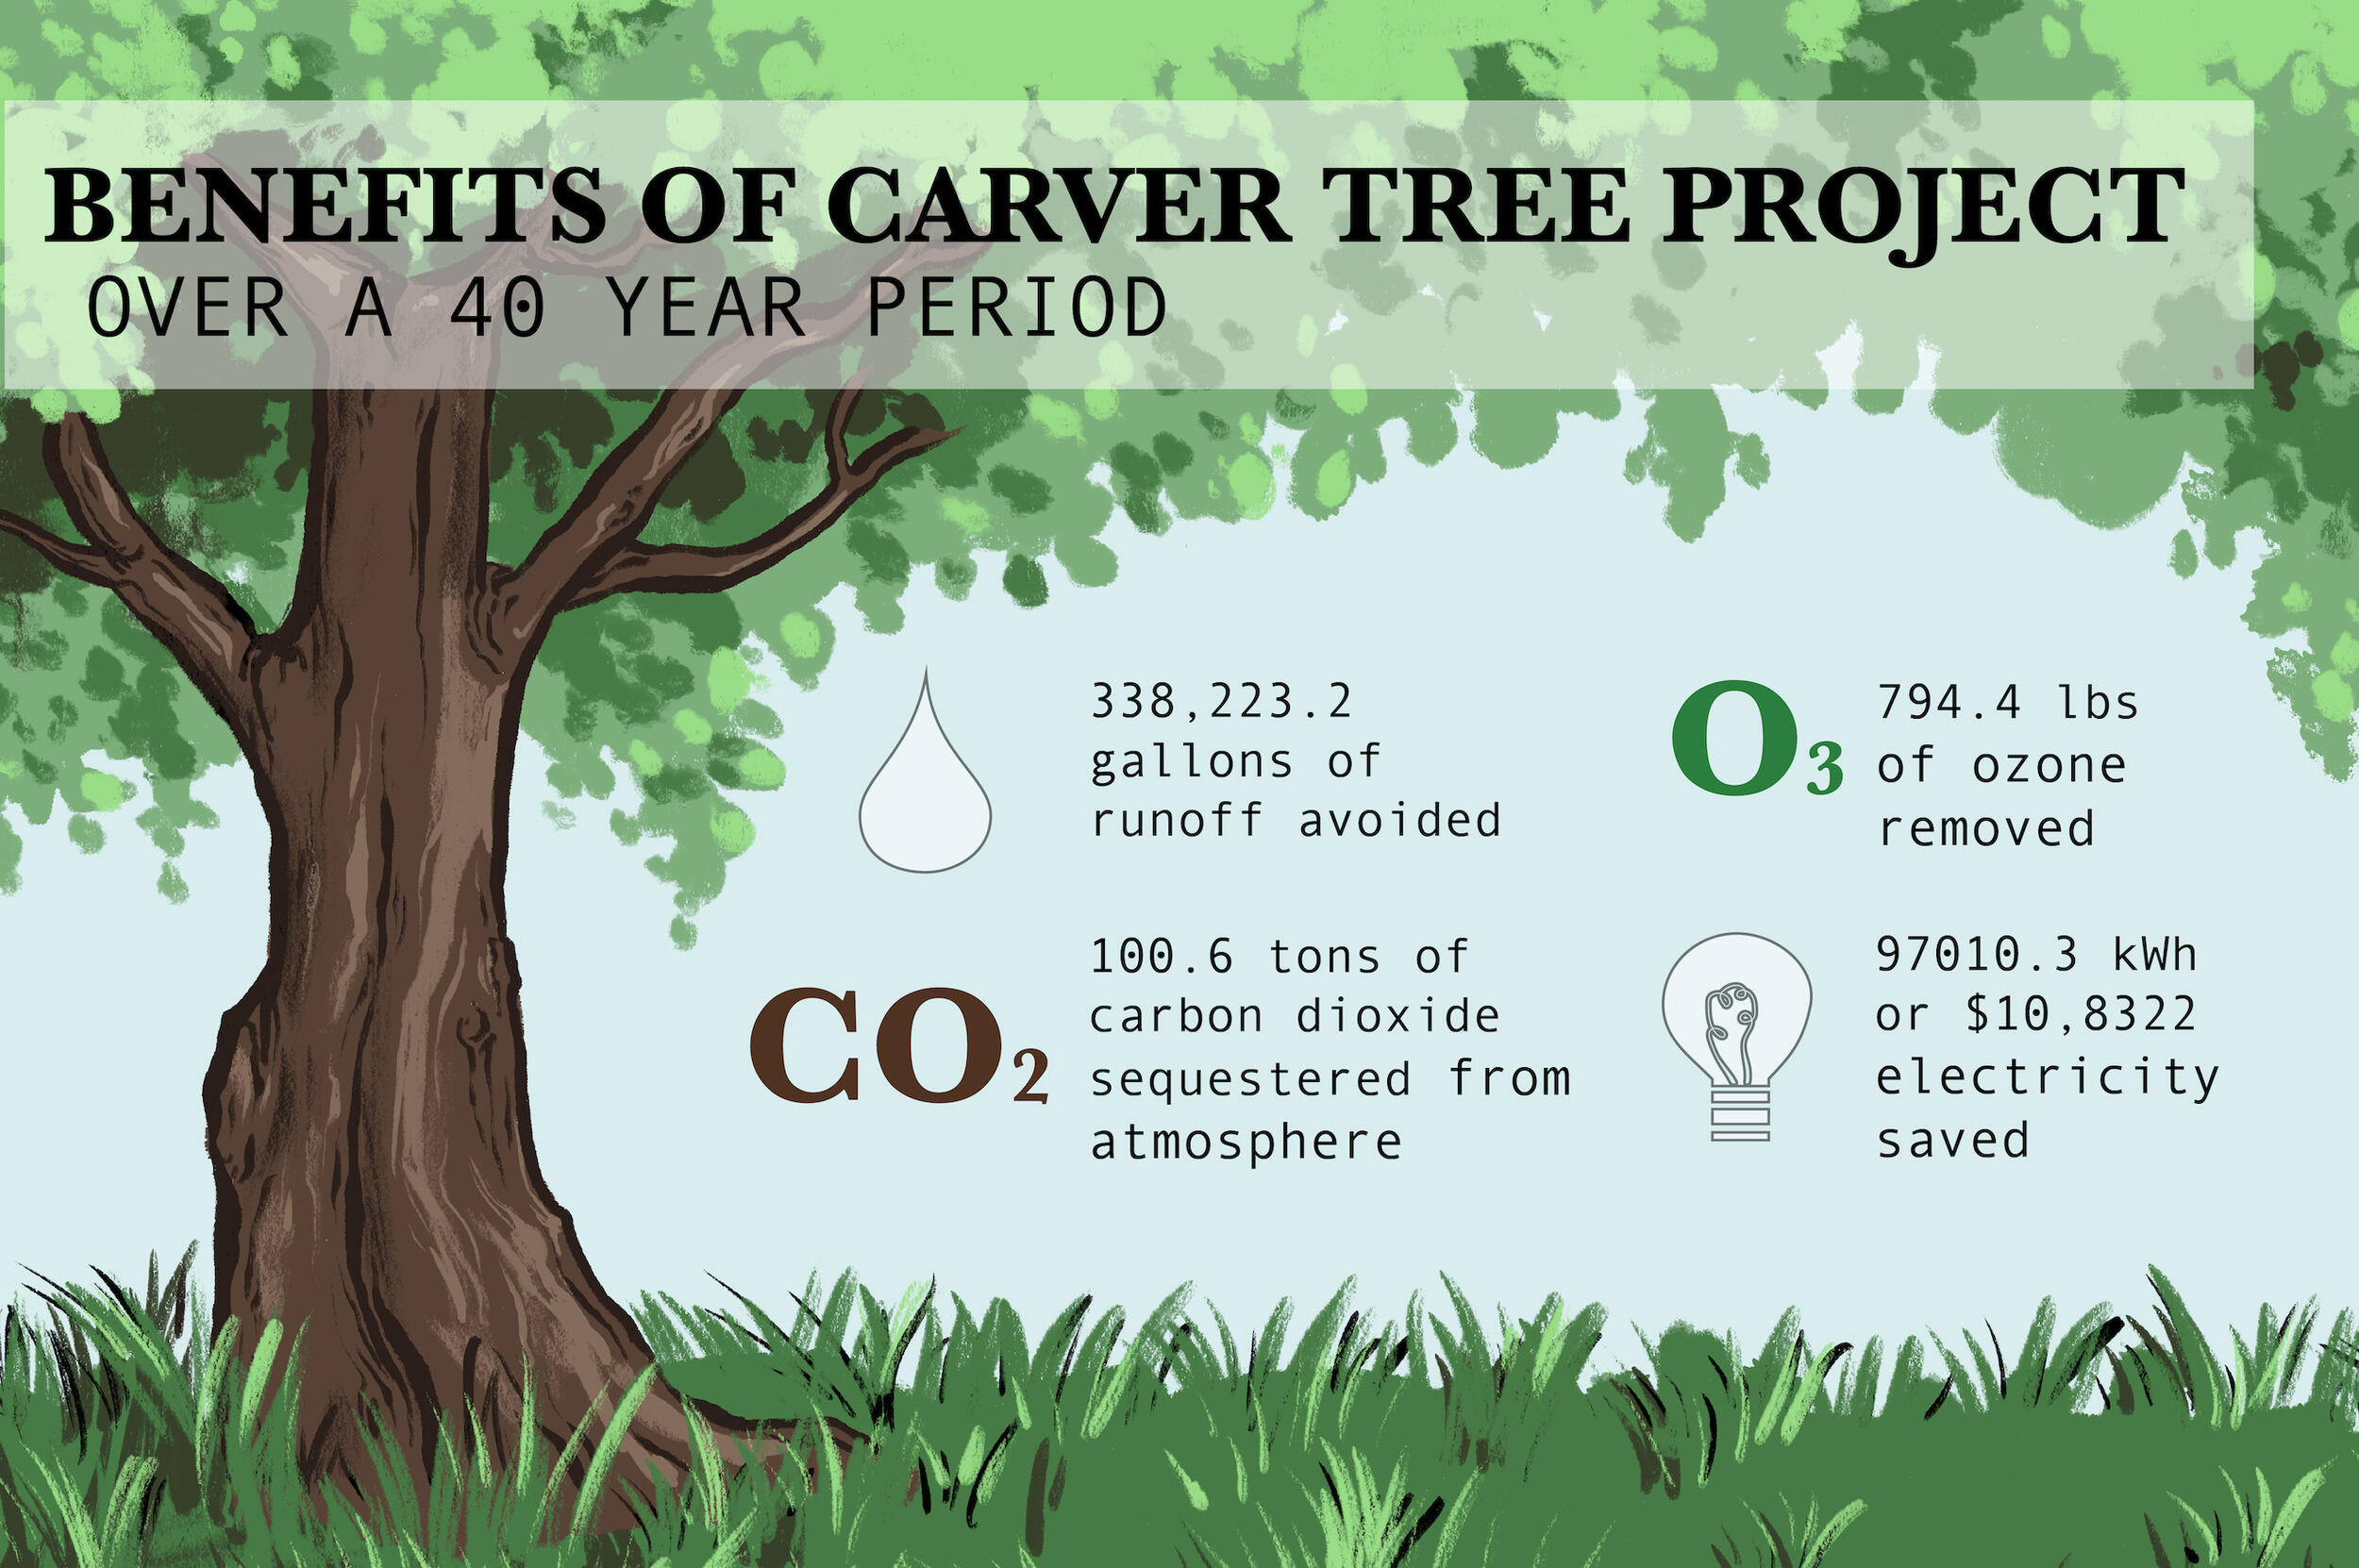 The projected 40-year impact of the Carver Tree Project includes the removal of carbon dioxide, ozone, and runoff from the environment. (Infographic by Ellie Erhart, University Public Affairs)